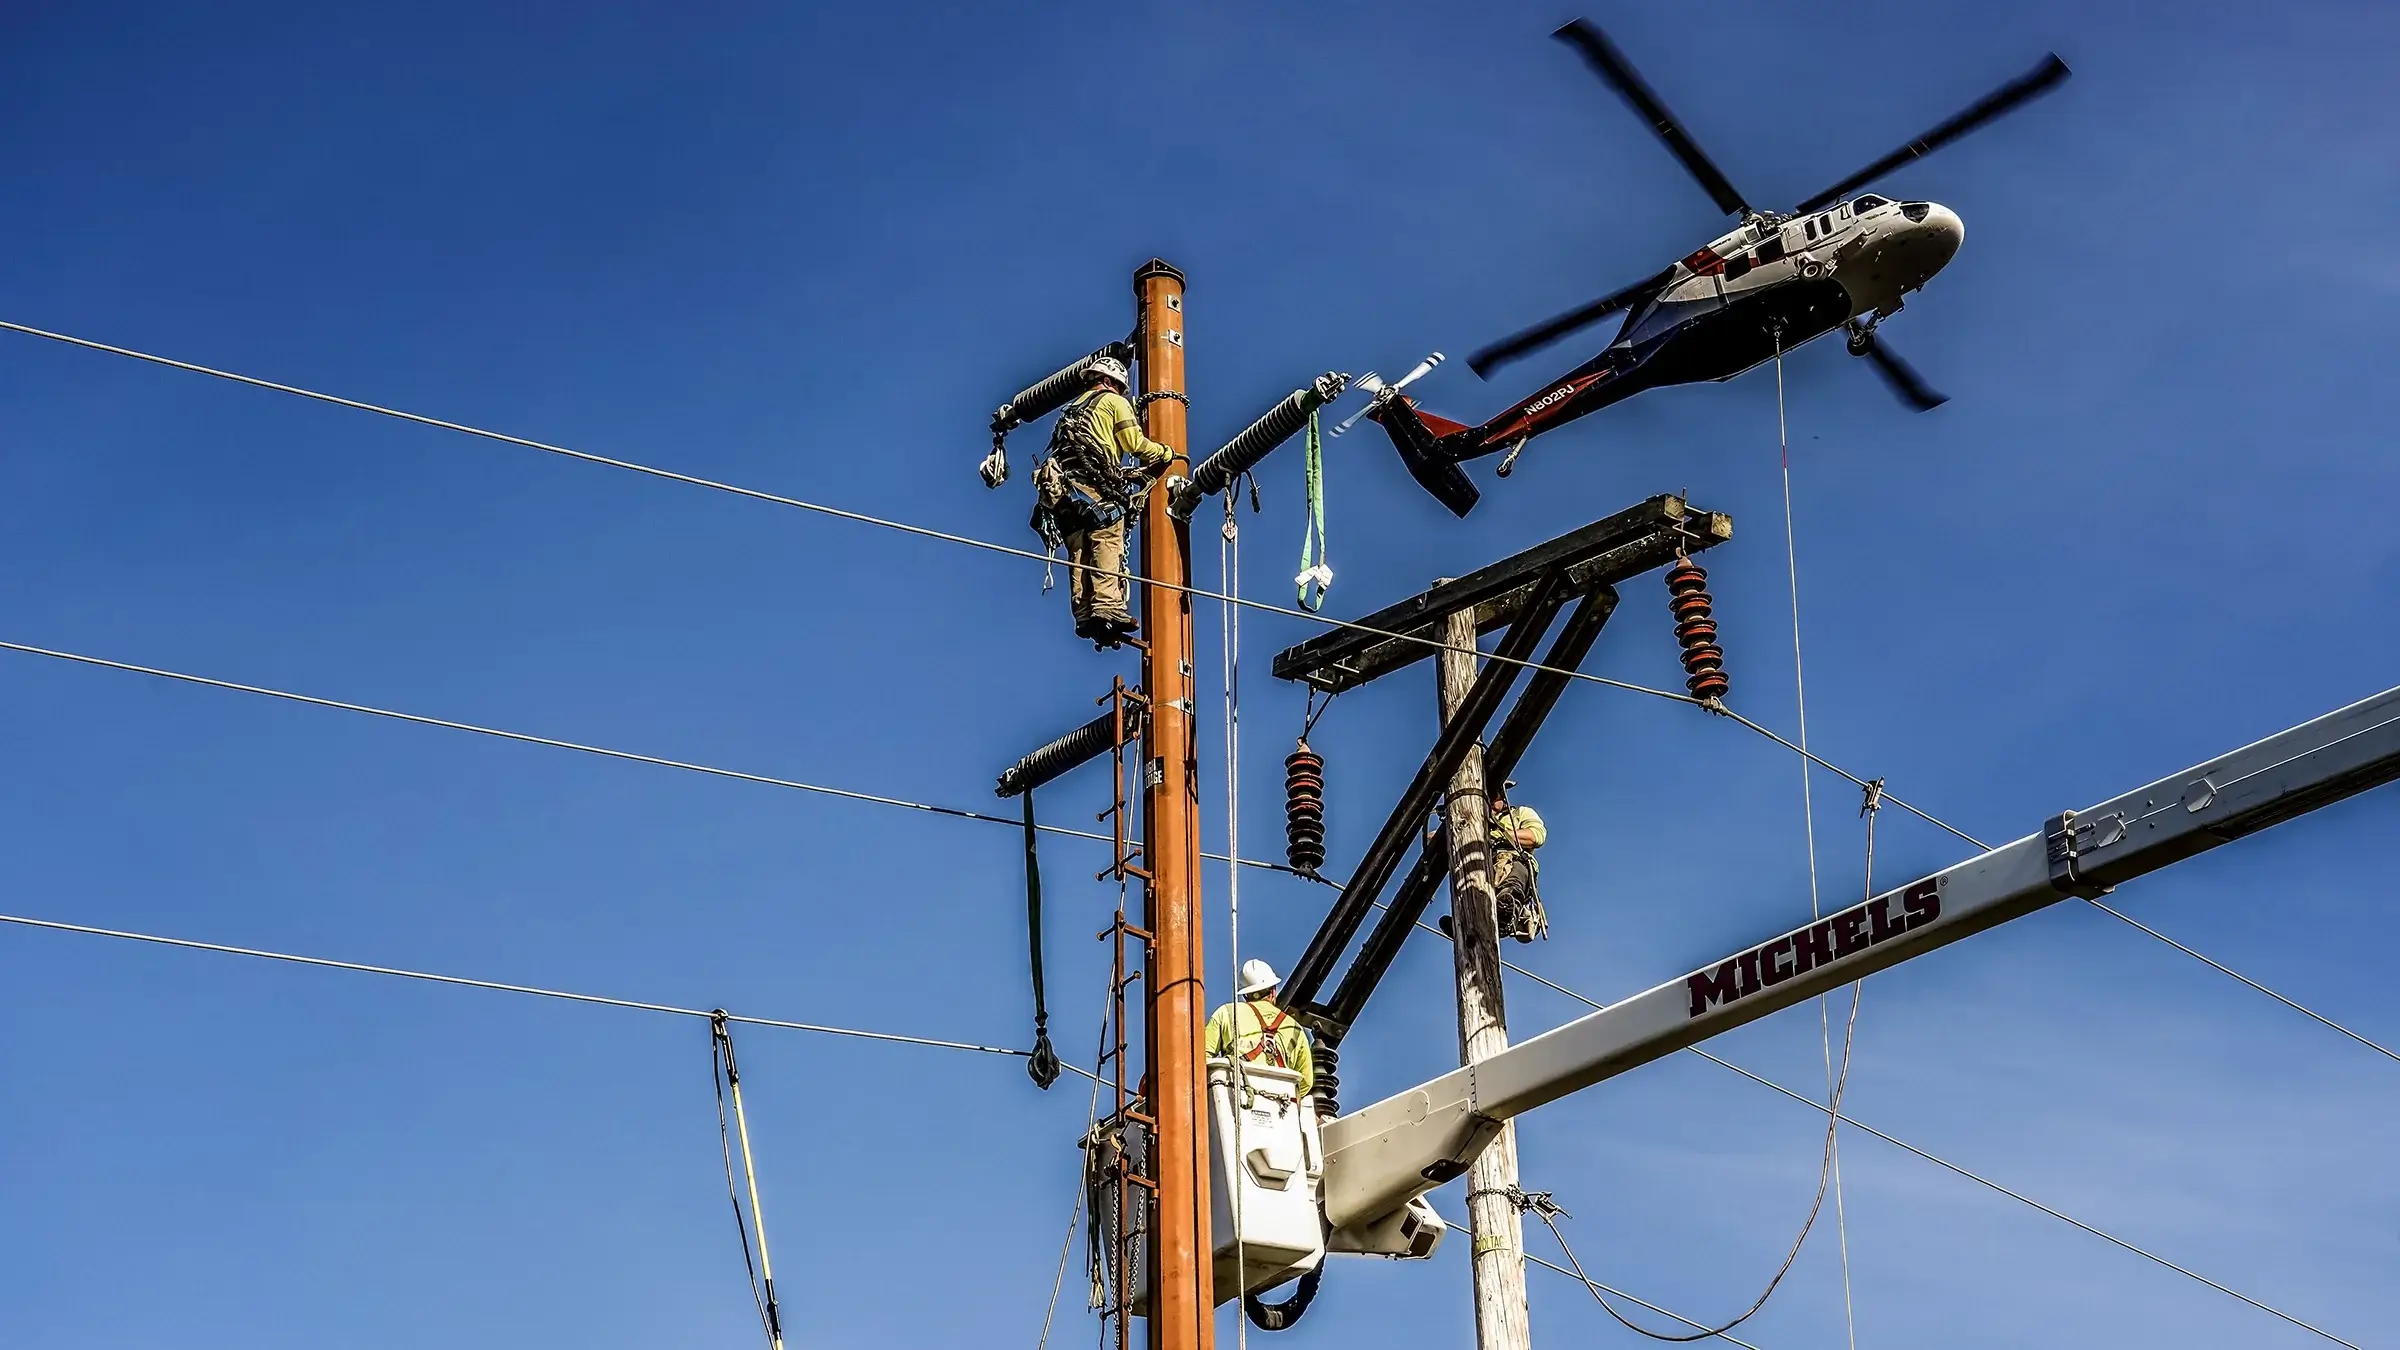 Power linemen work on power lines with support of a bucket truck and helicopter